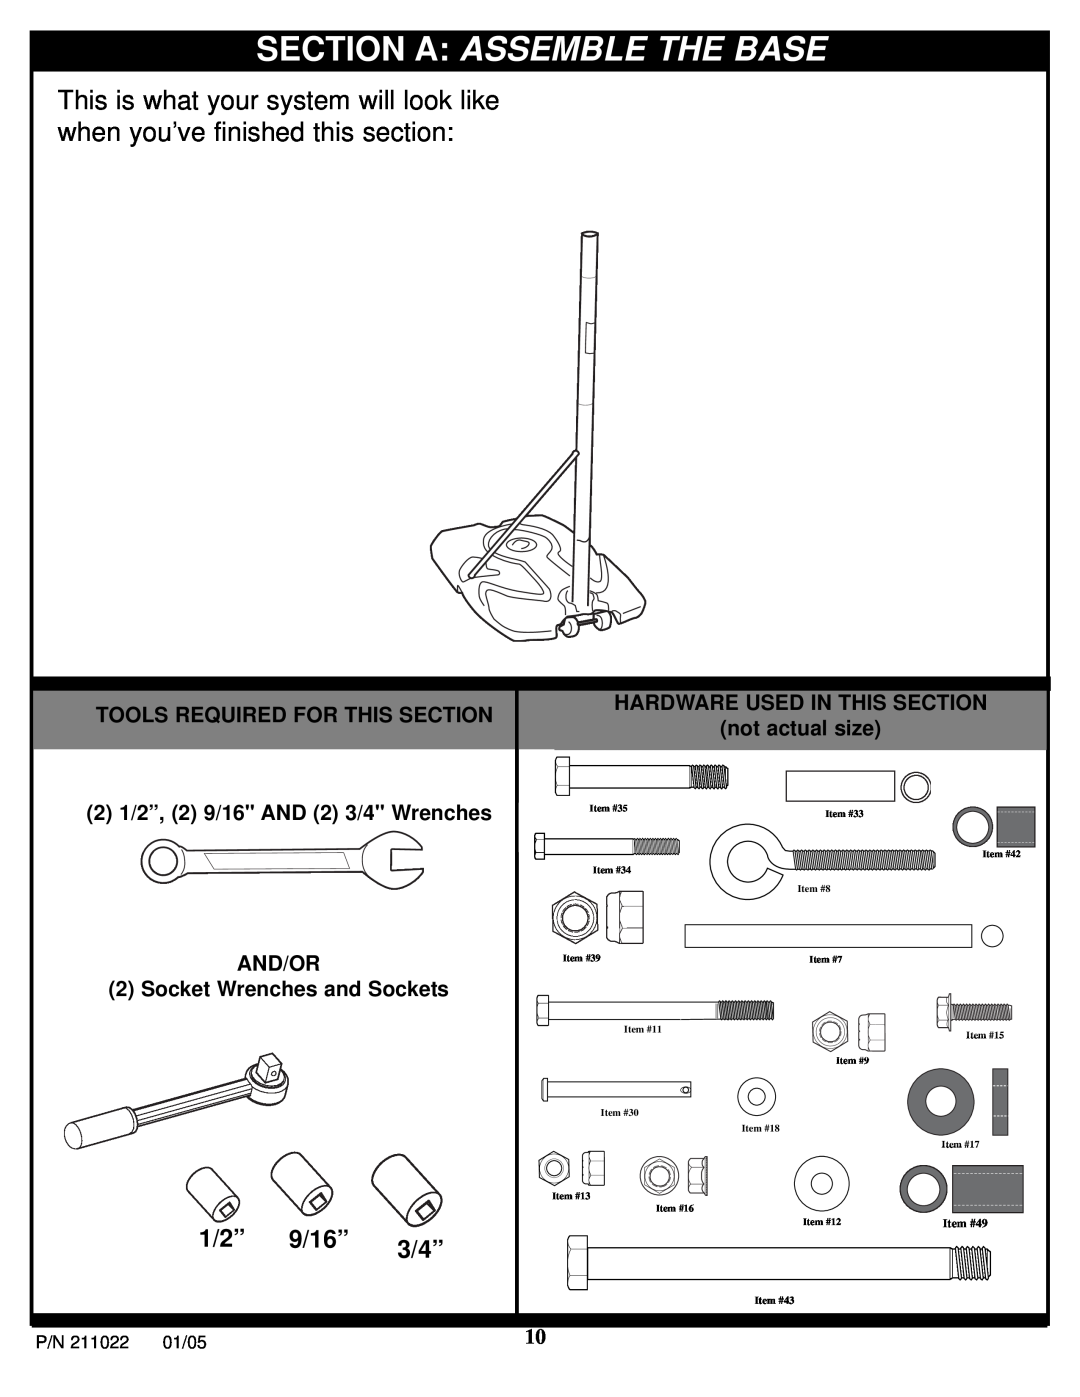 Huffy Portable System manual Section A Assemble The Base, 1/2” 9/16” 3/4”, AND/OR 2 Socket Wrenches and Sockets 